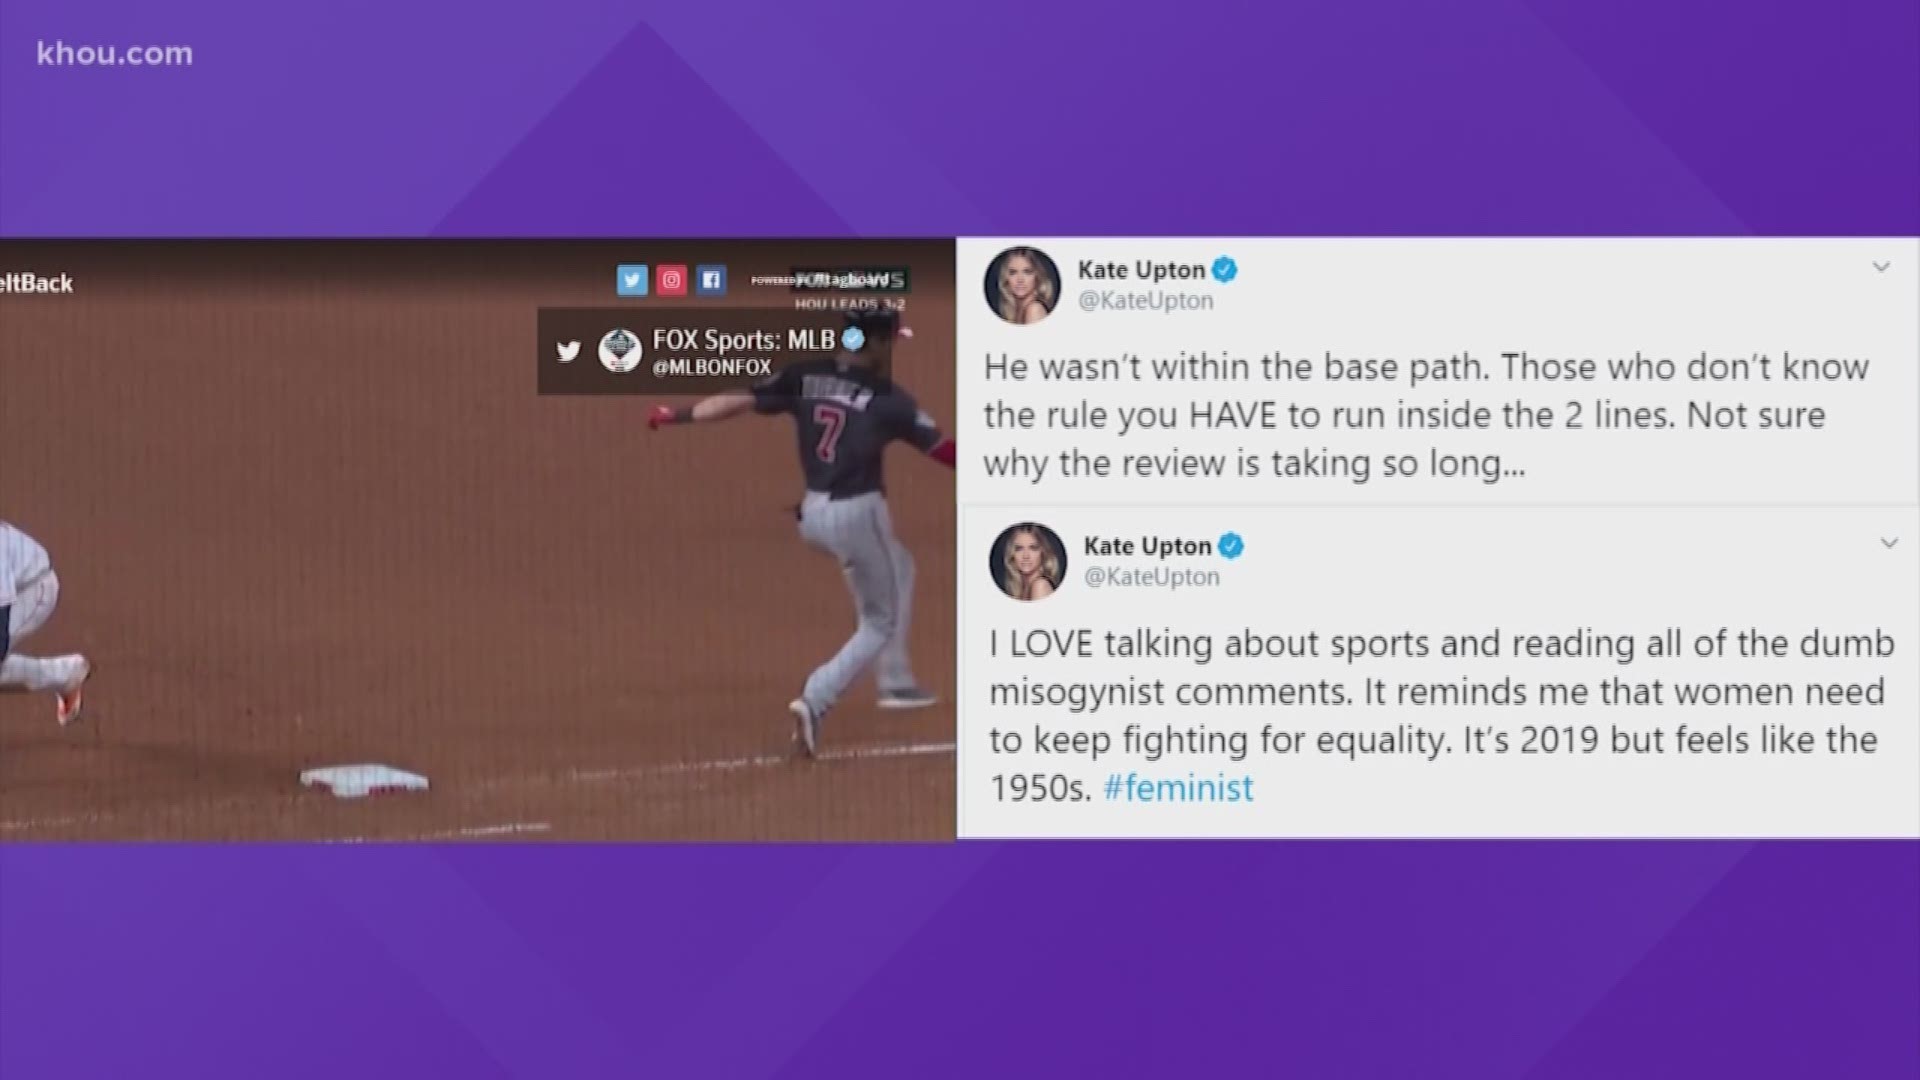 The wife of Astros star Justin Verlander says she loves "talking about sports and reading all of the dumb misogynist comments."